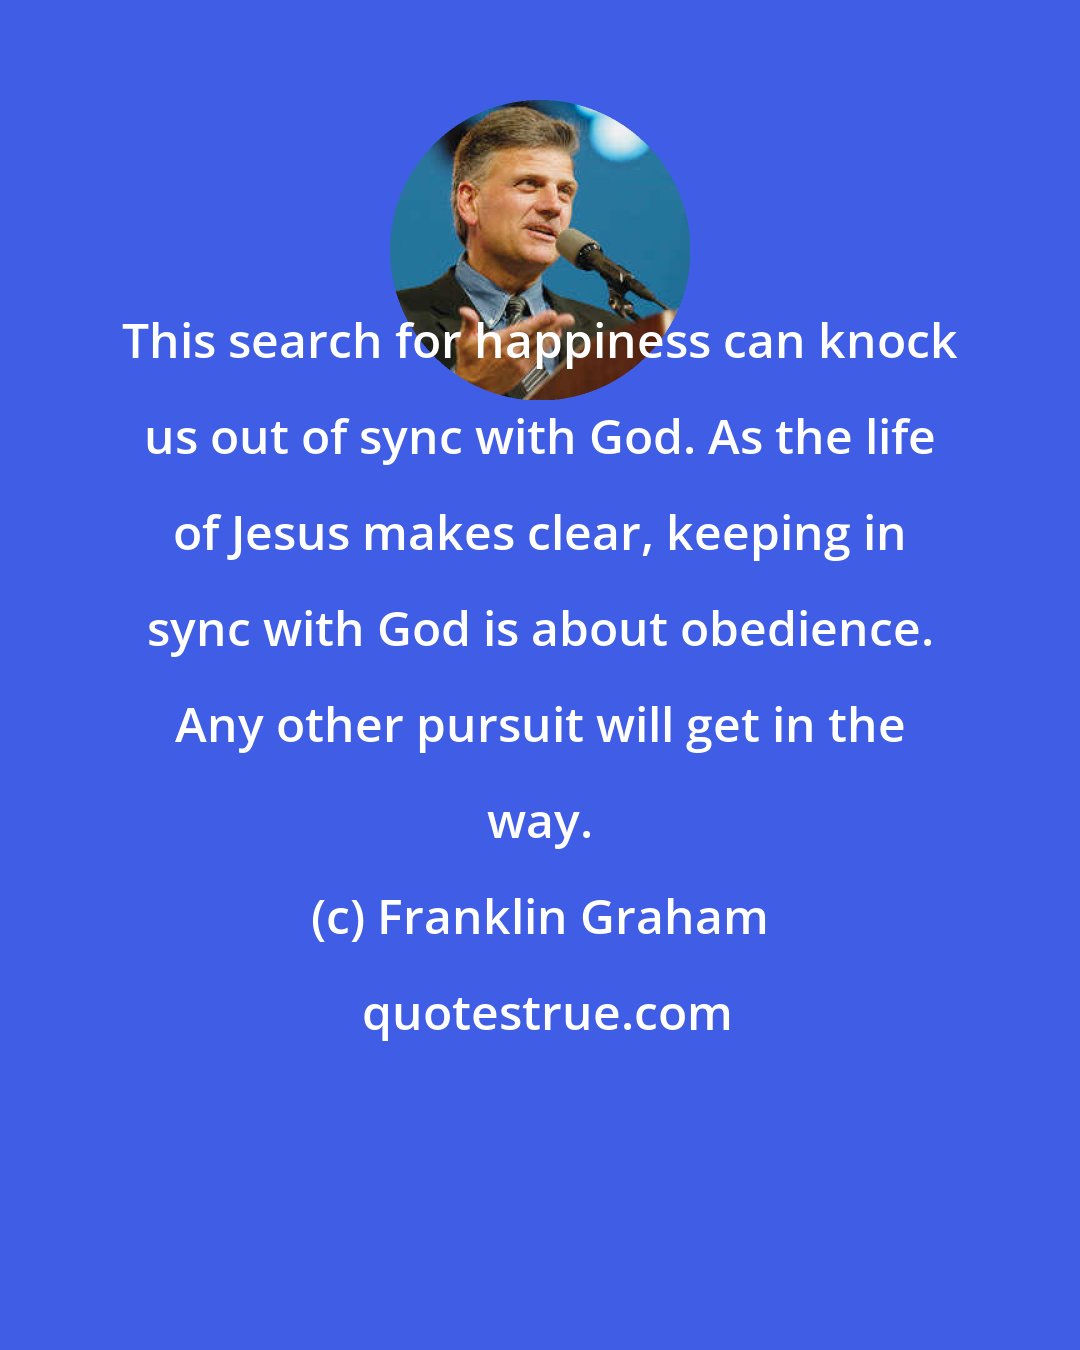 Franklin Graham: This search for happiness can knock us out of sync with God. As the life of Jesus makes clear, keeping in sync with God is about obedience. Any other pursuit will get in the way.